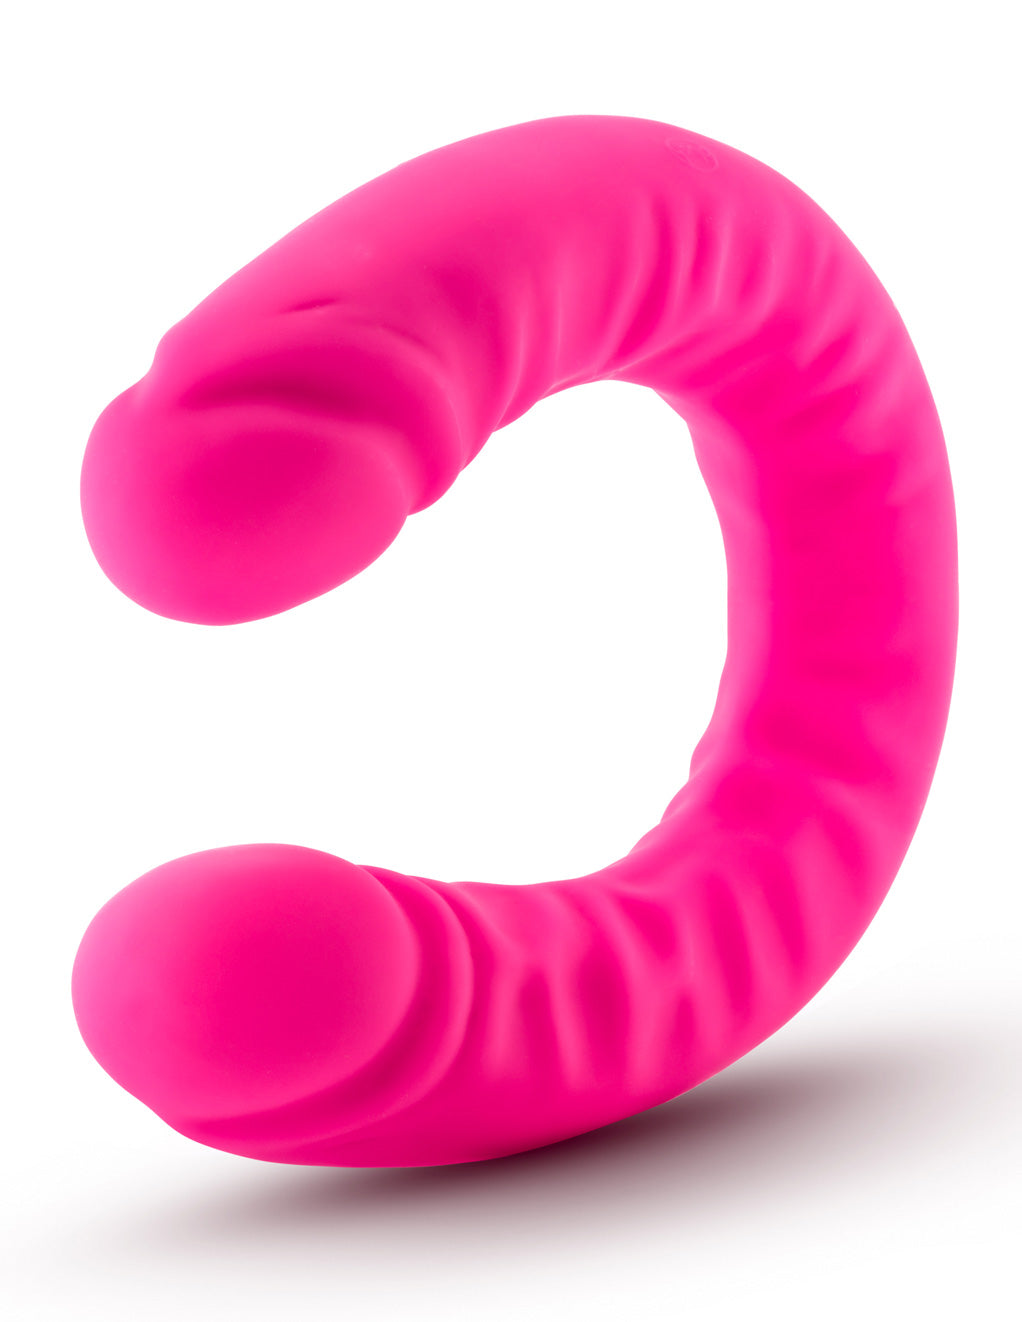 Ruse 18-inch Silicone Double Dong By Blush Novelties Close Up